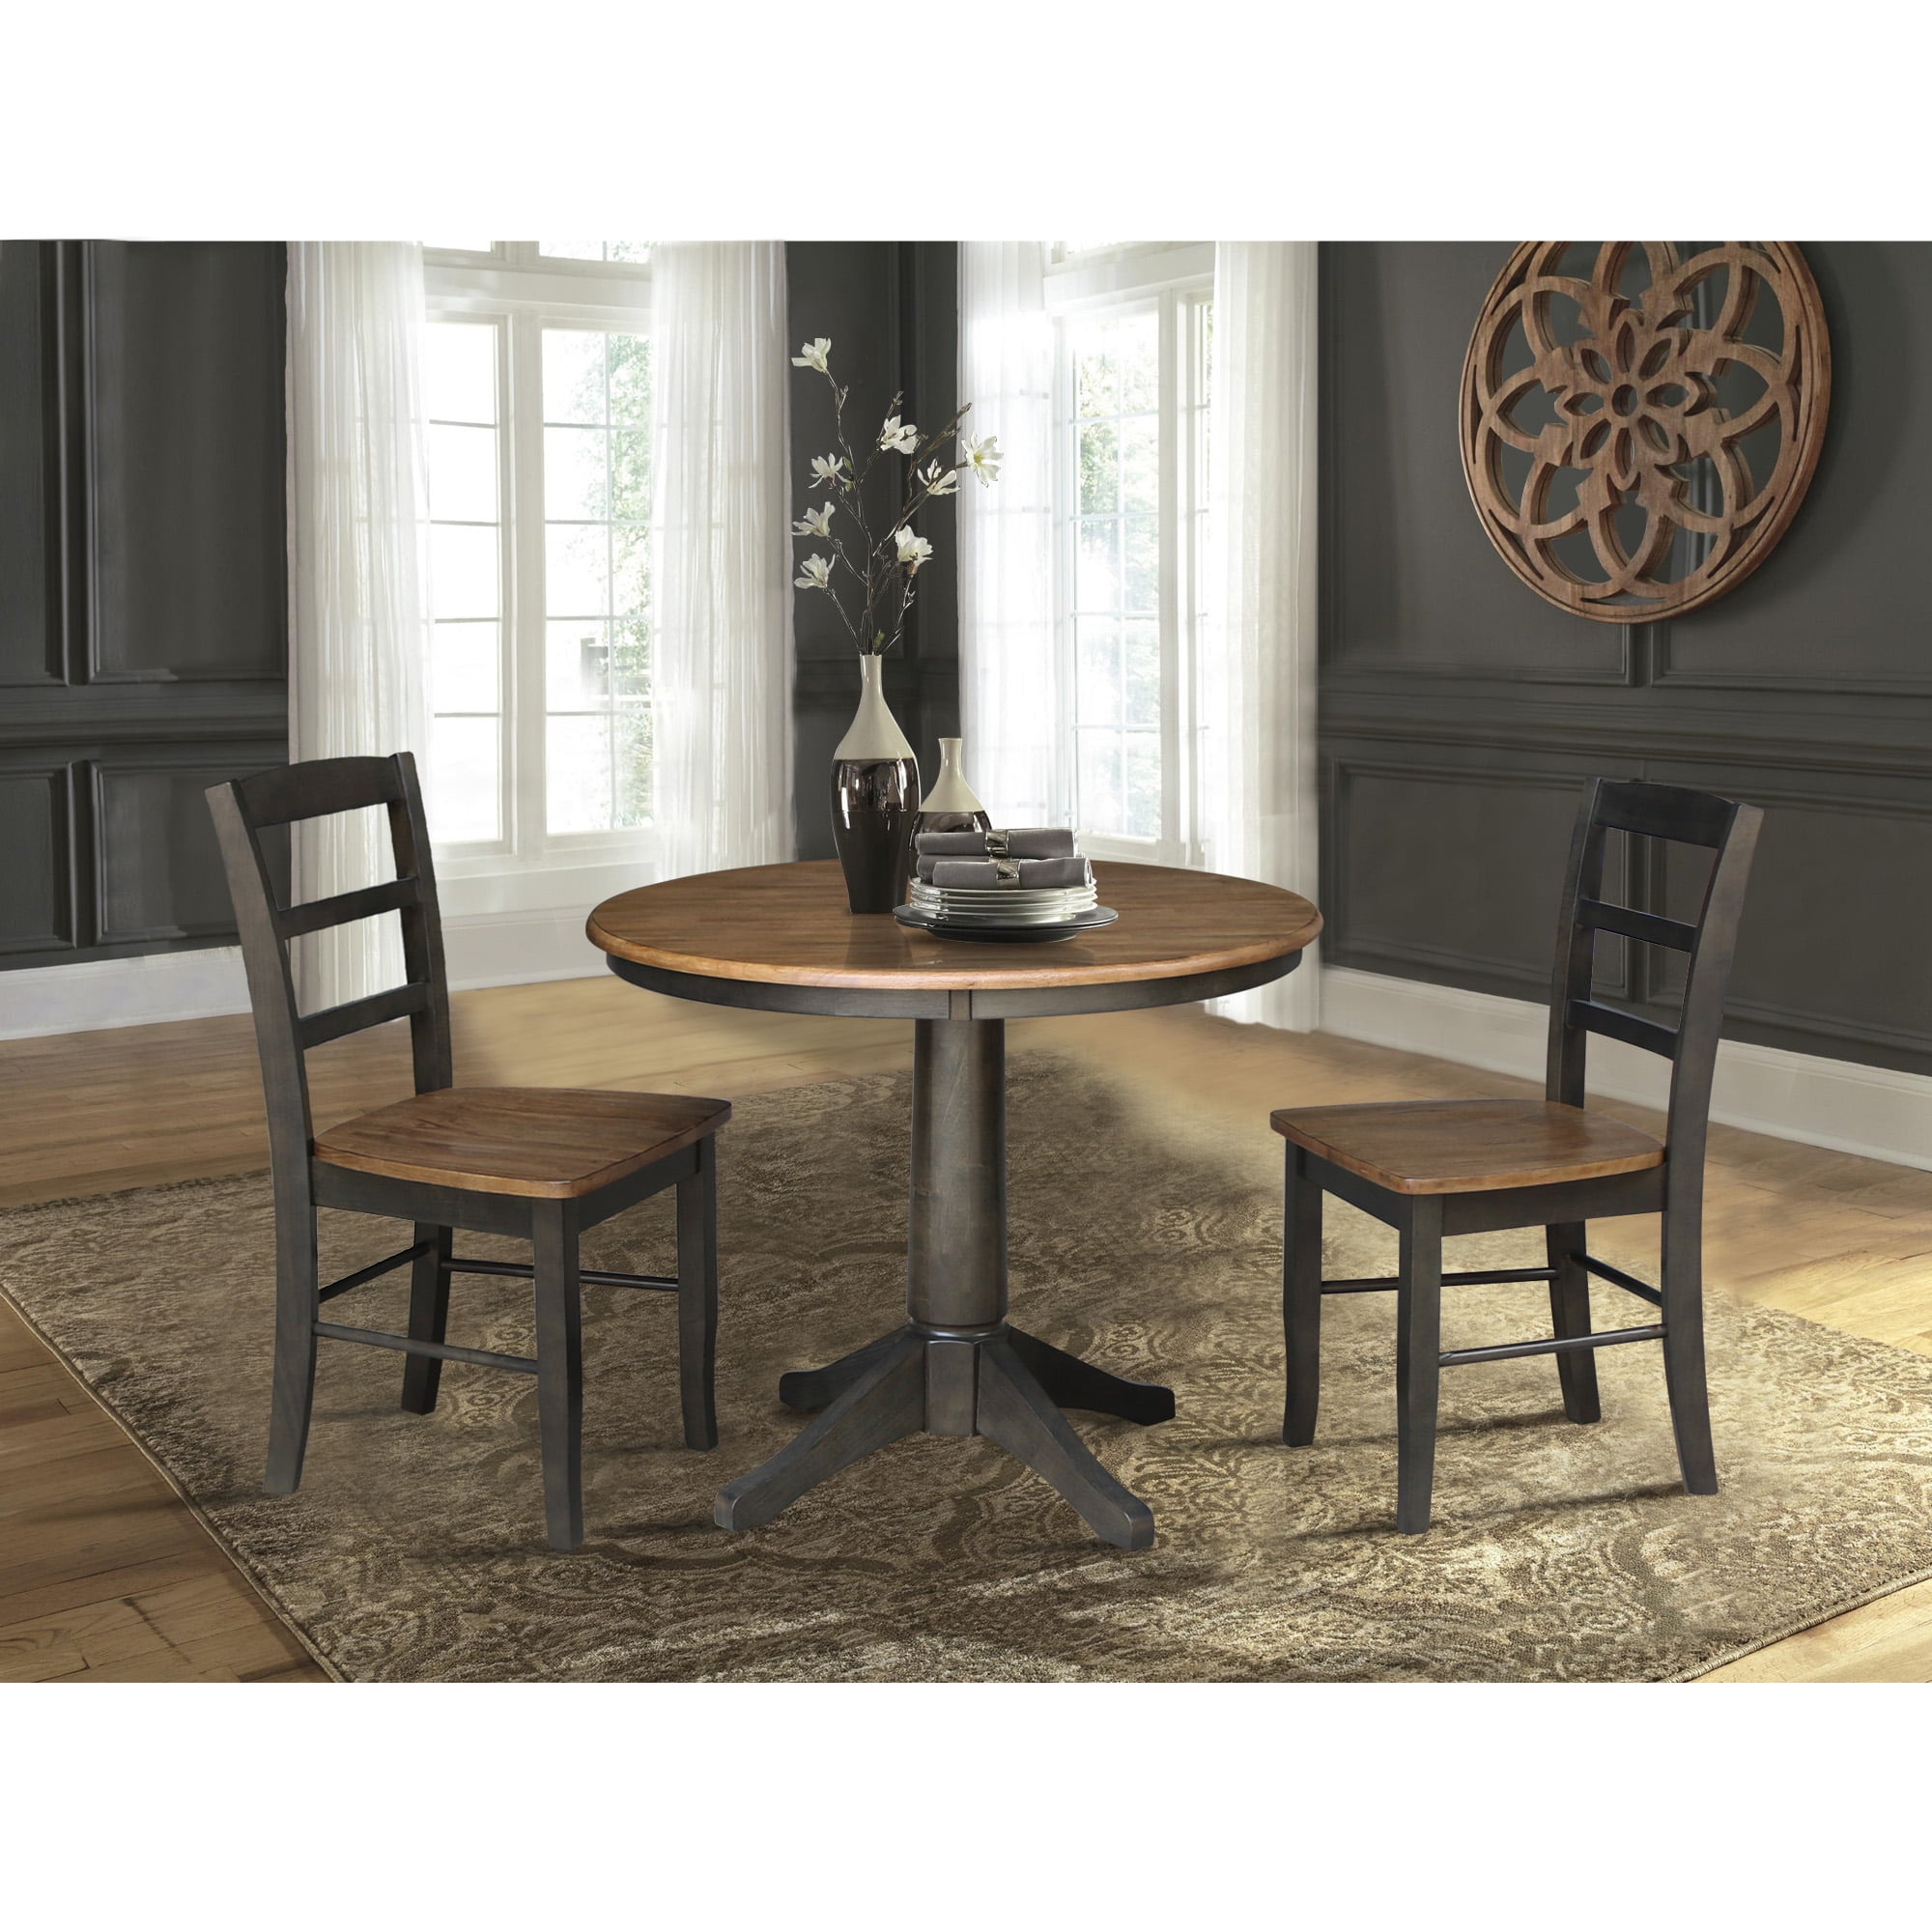 Madrid Ladderback Chairs, 36 Round Pedestal Dining Table Set